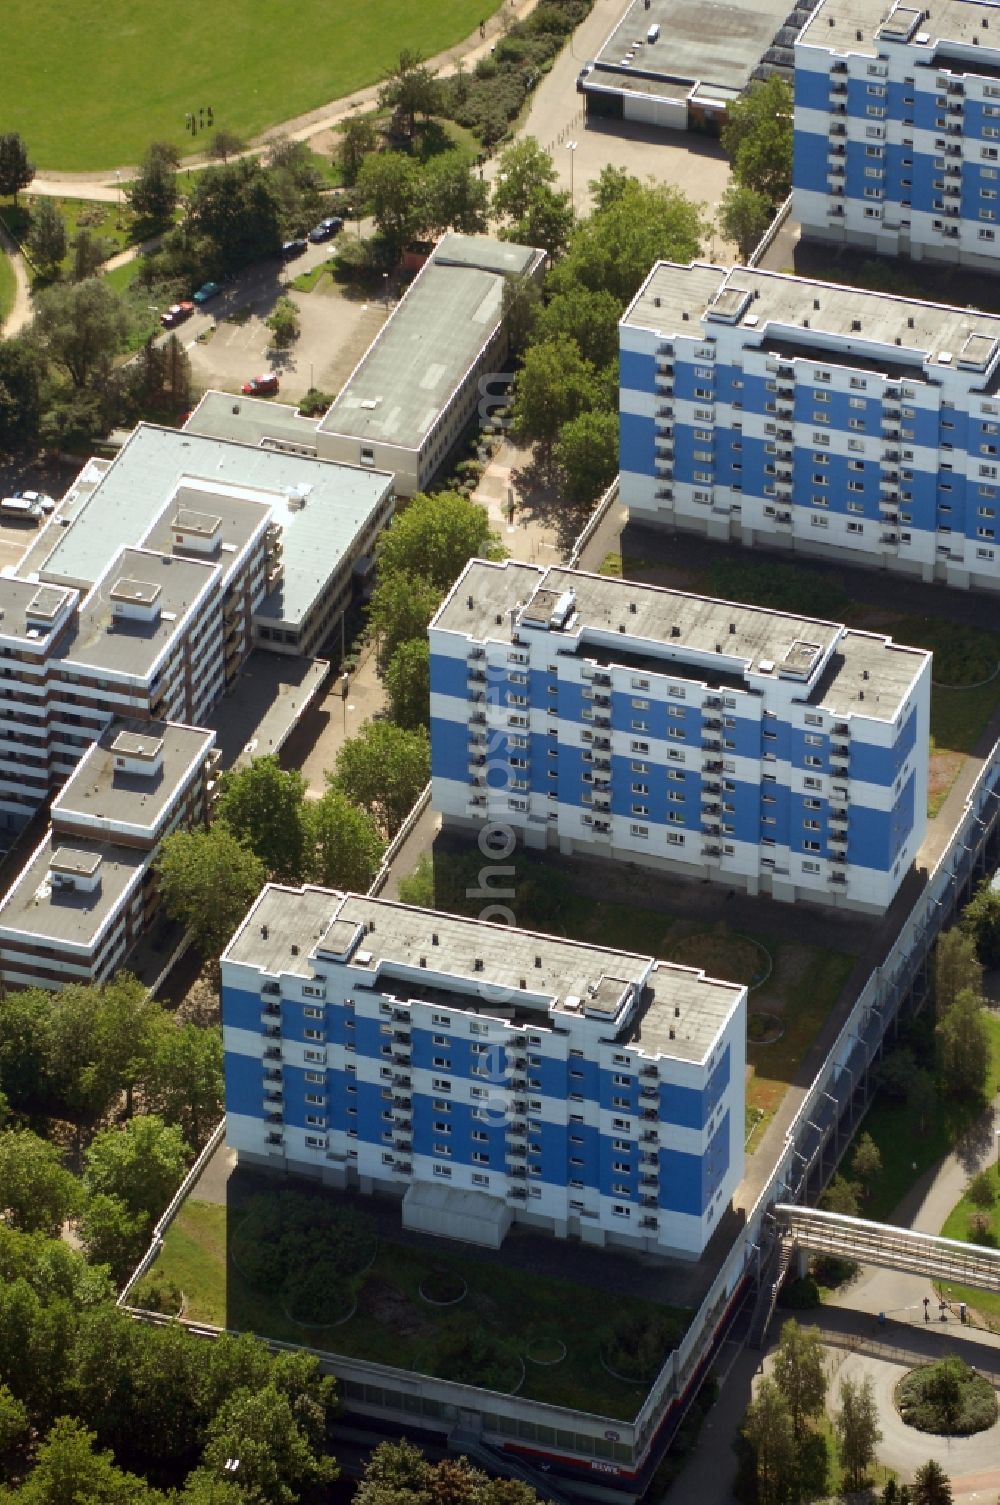 Aerial image Norderstedt - Roof and wall structures in residential area of a multi-family house settlement on Herold Center in Norderstedt in the state Schleswig-Holstein, Germany